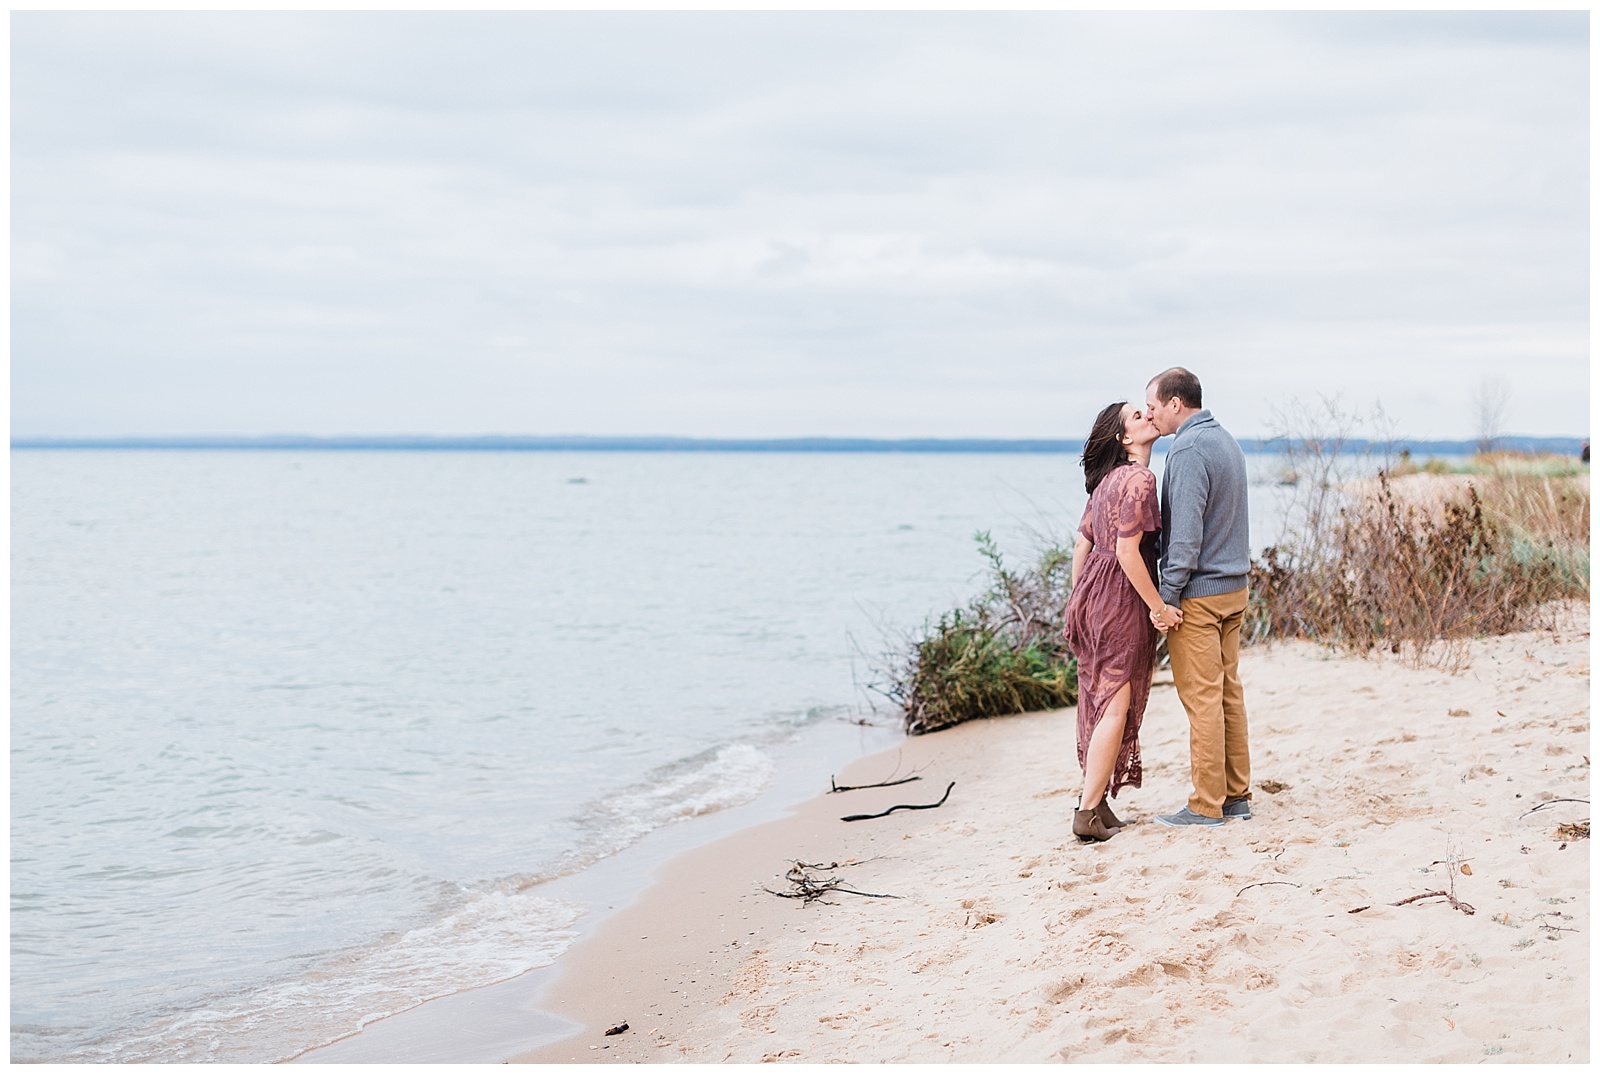 Couple kissing on beach in Old Mission Peninsula, Traverse City, Michigan.